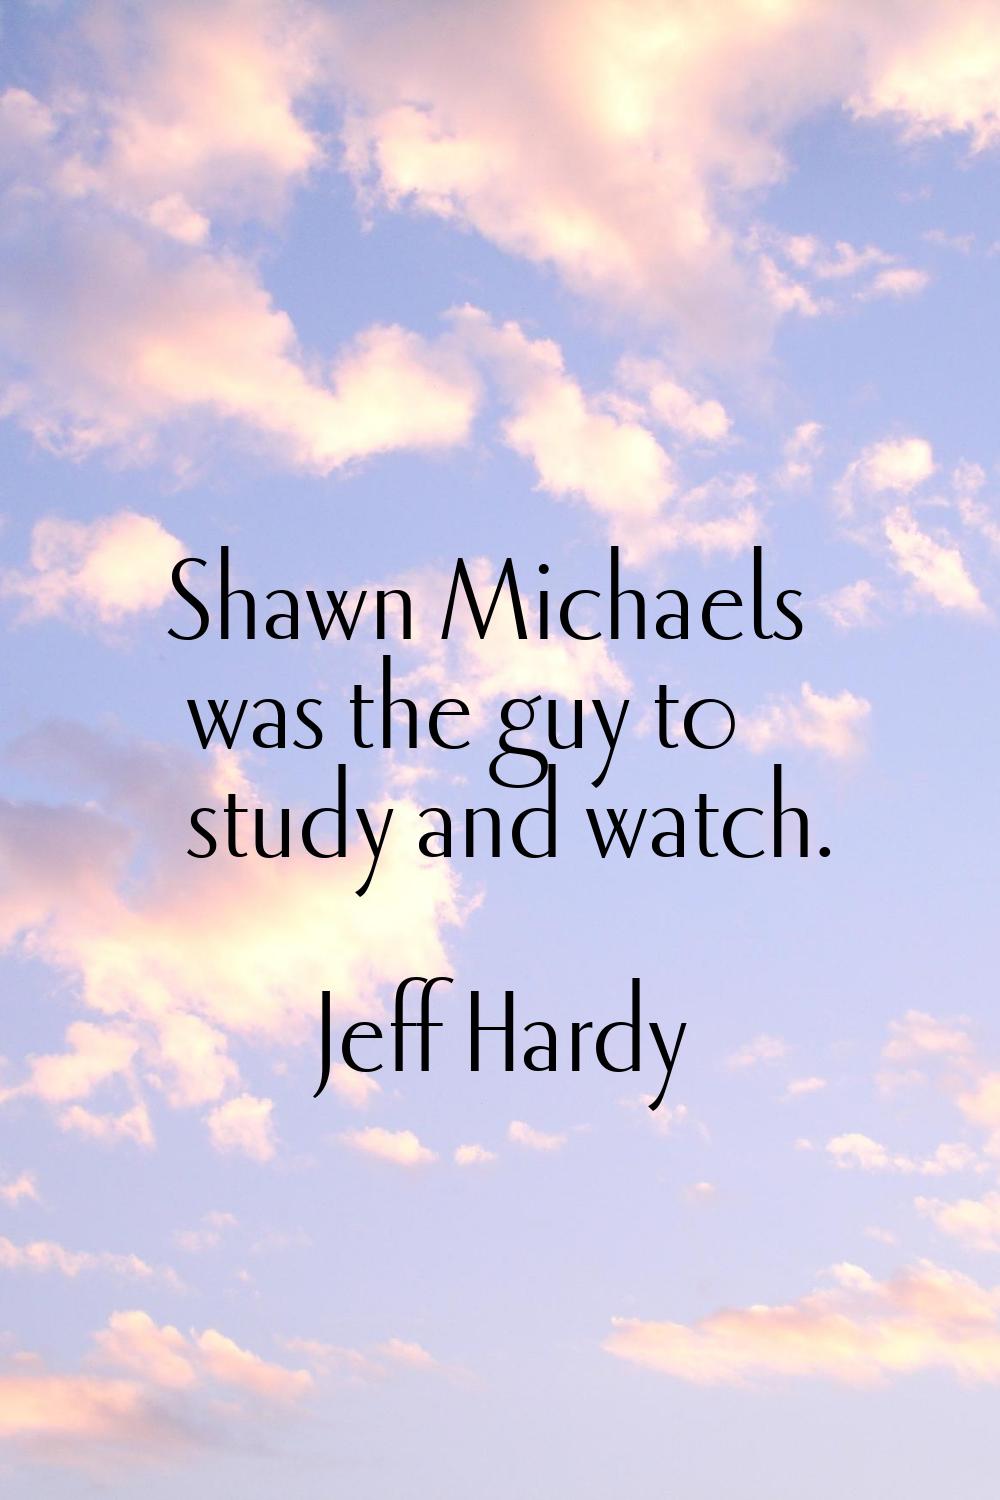 Shawn Michaels was the guy to study and watch.